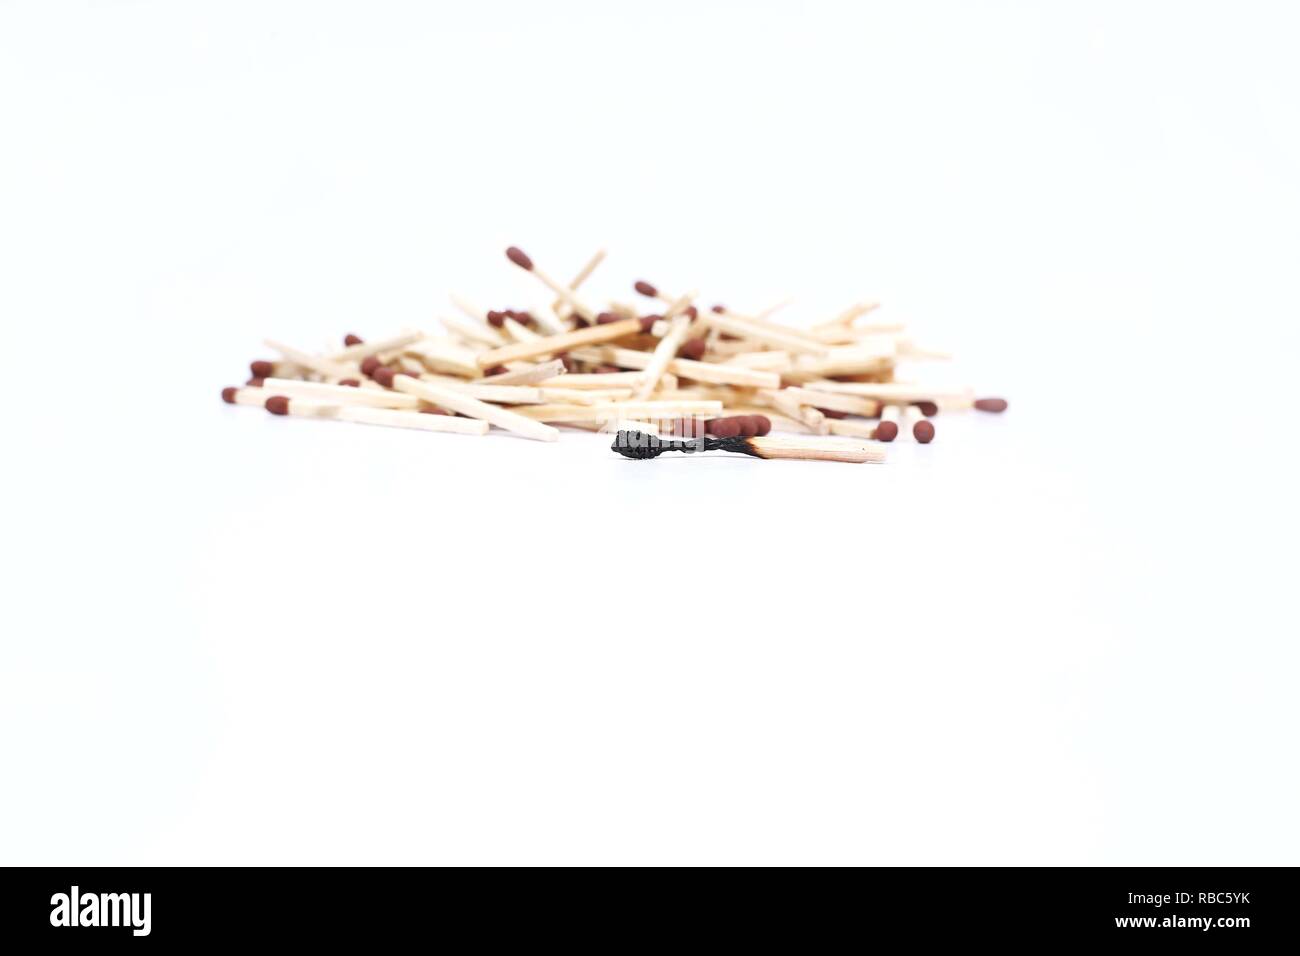 Picture of pile wooden matches with one burnt matches. Isolated on the white background. Stock Photo